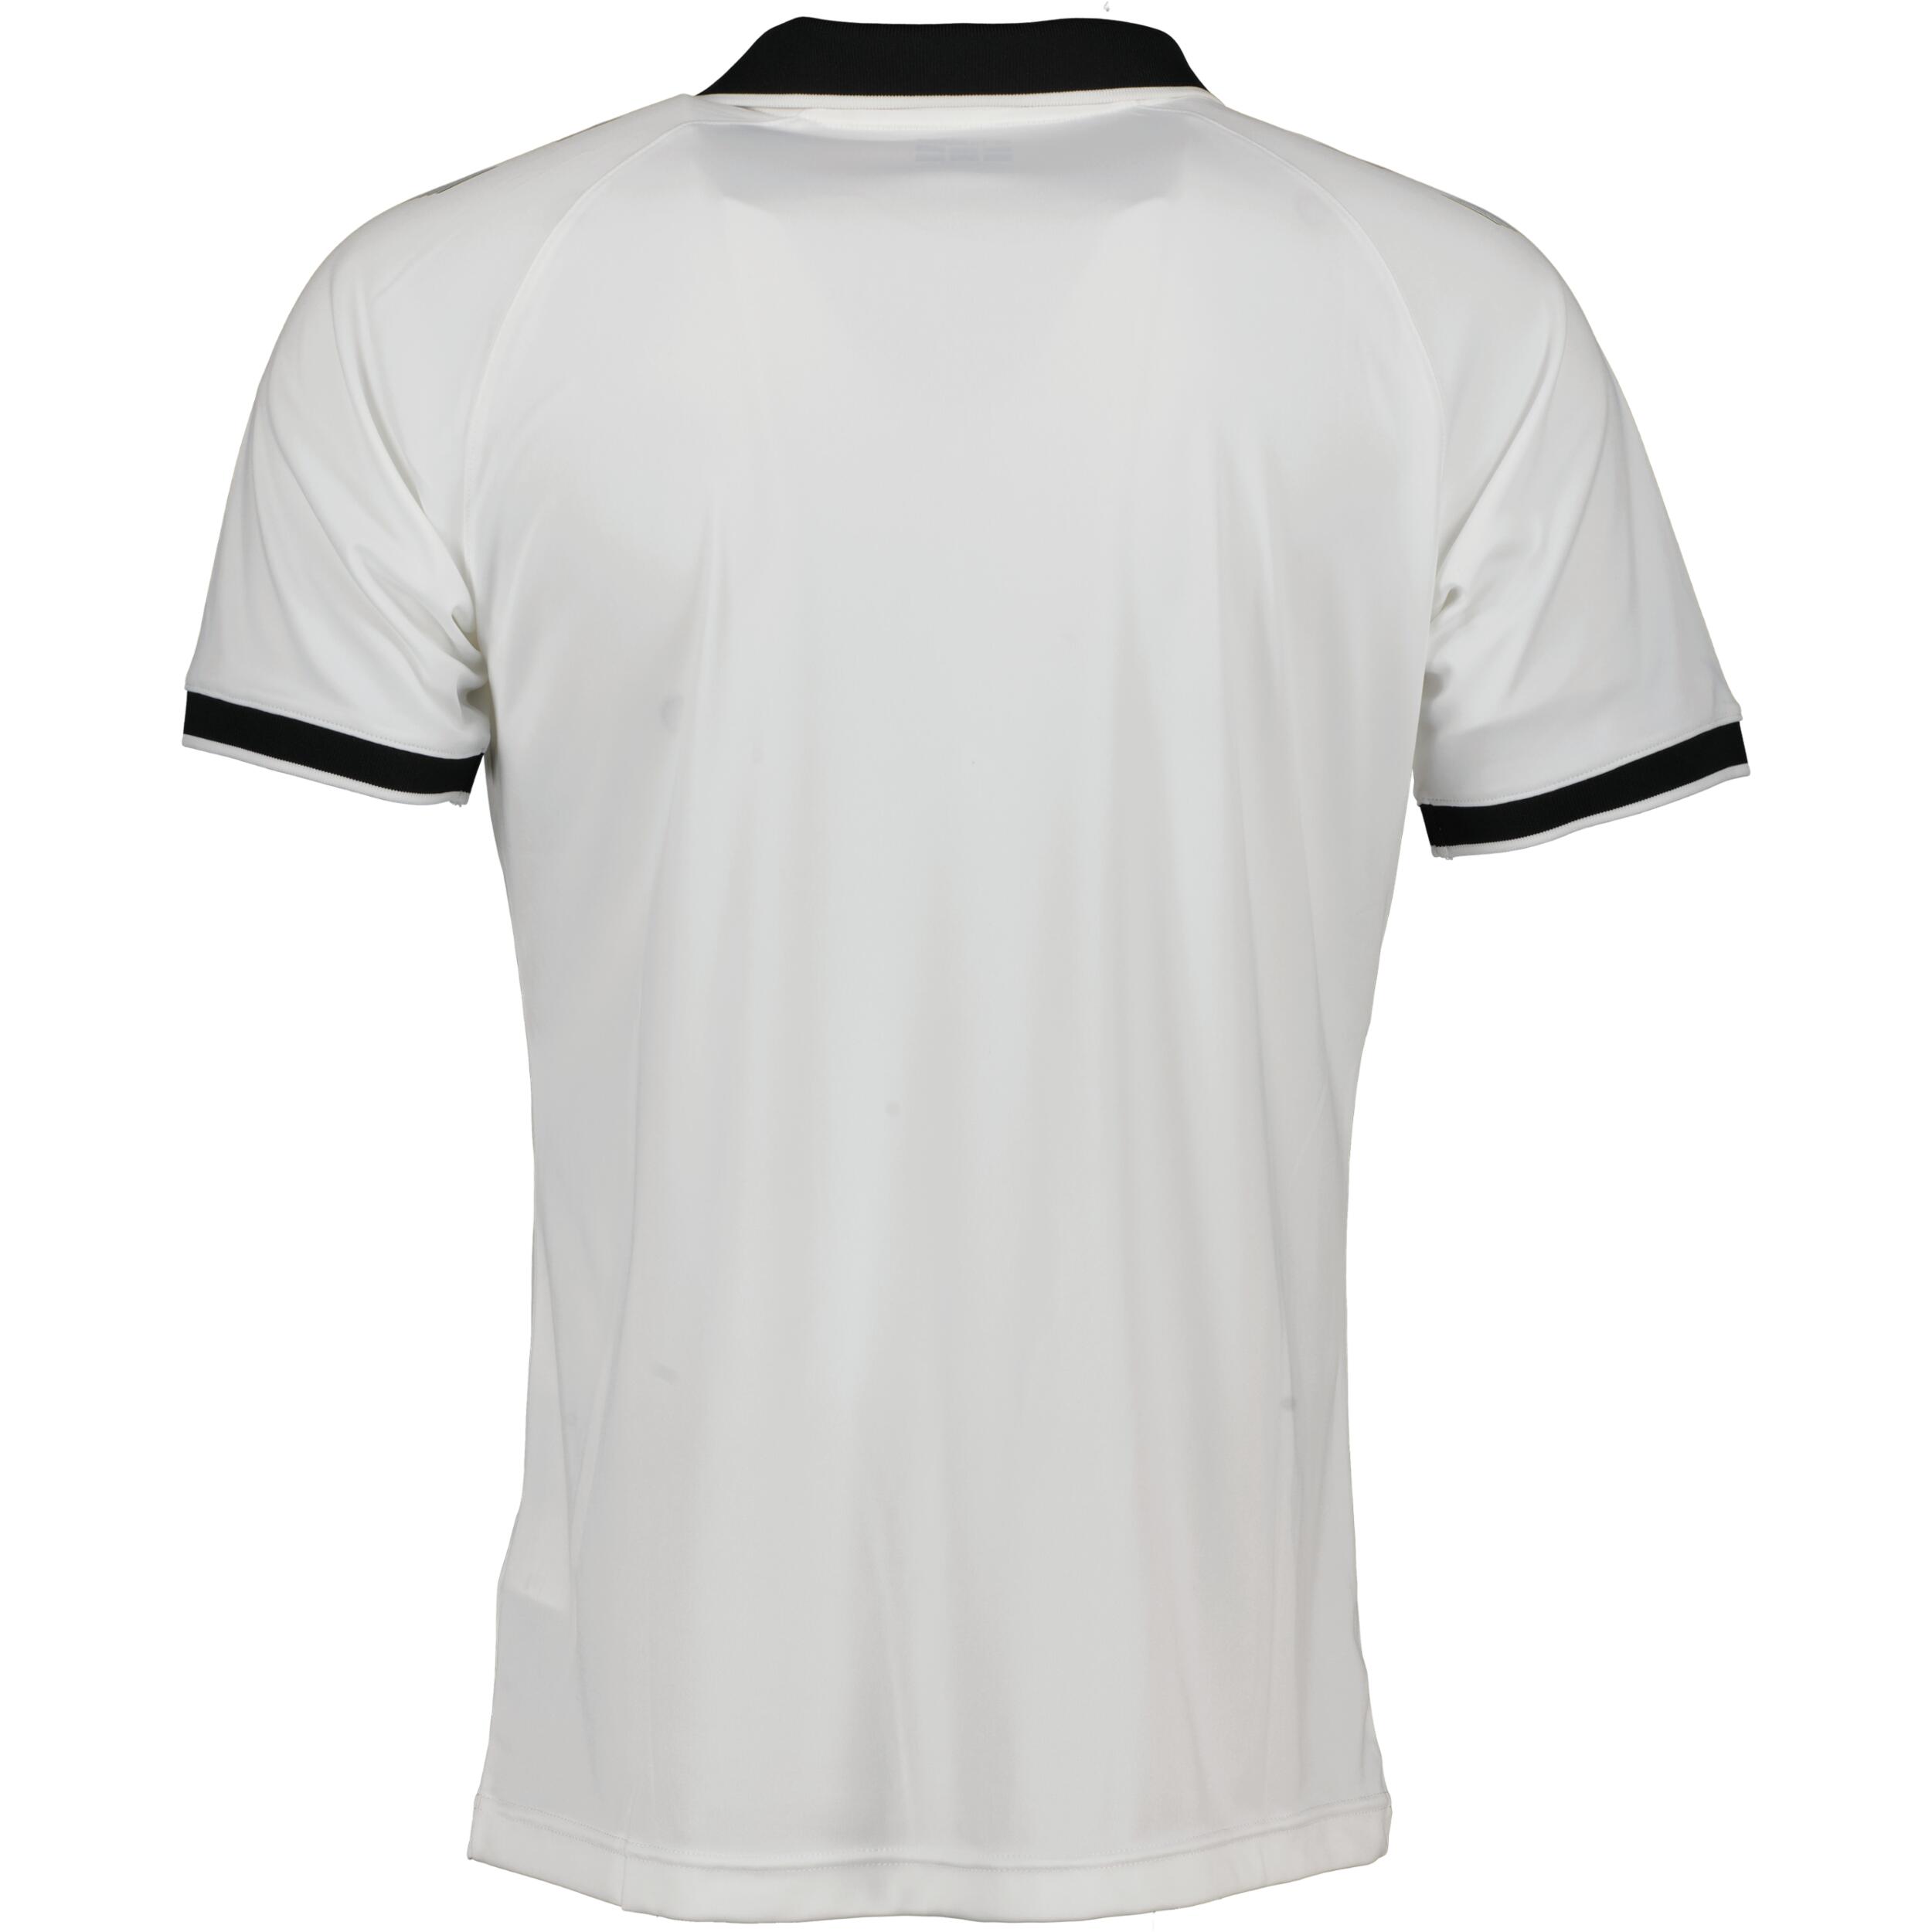 Impact jersey for juniors, great for football, in /black 2/3